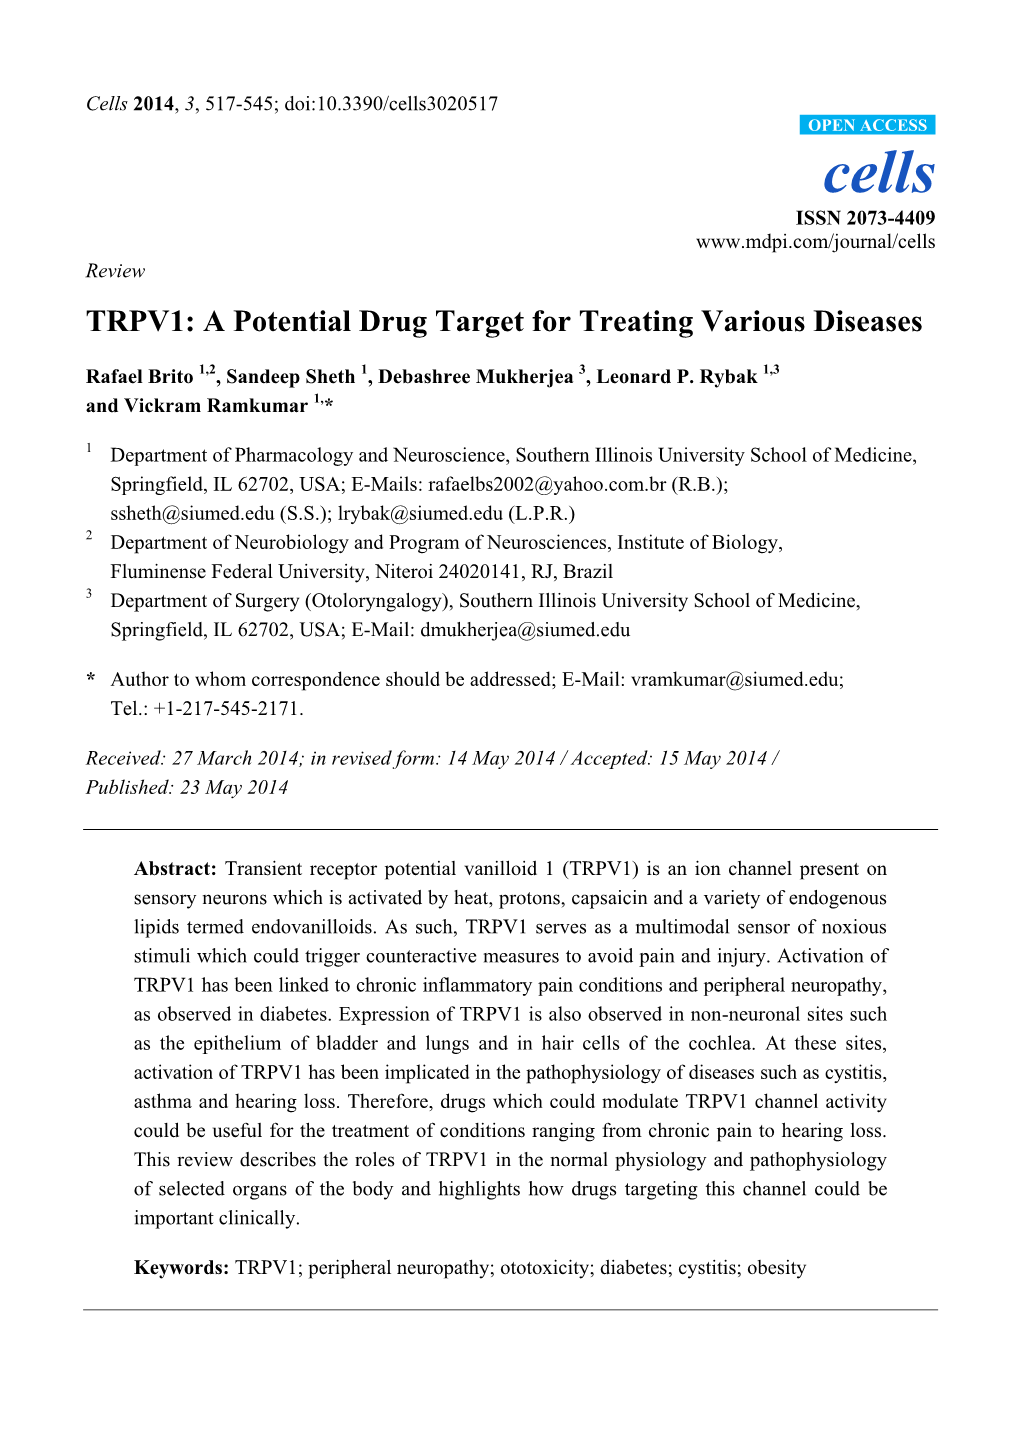 TRPV1: a Potential Drug Target for Treating Various Diseases